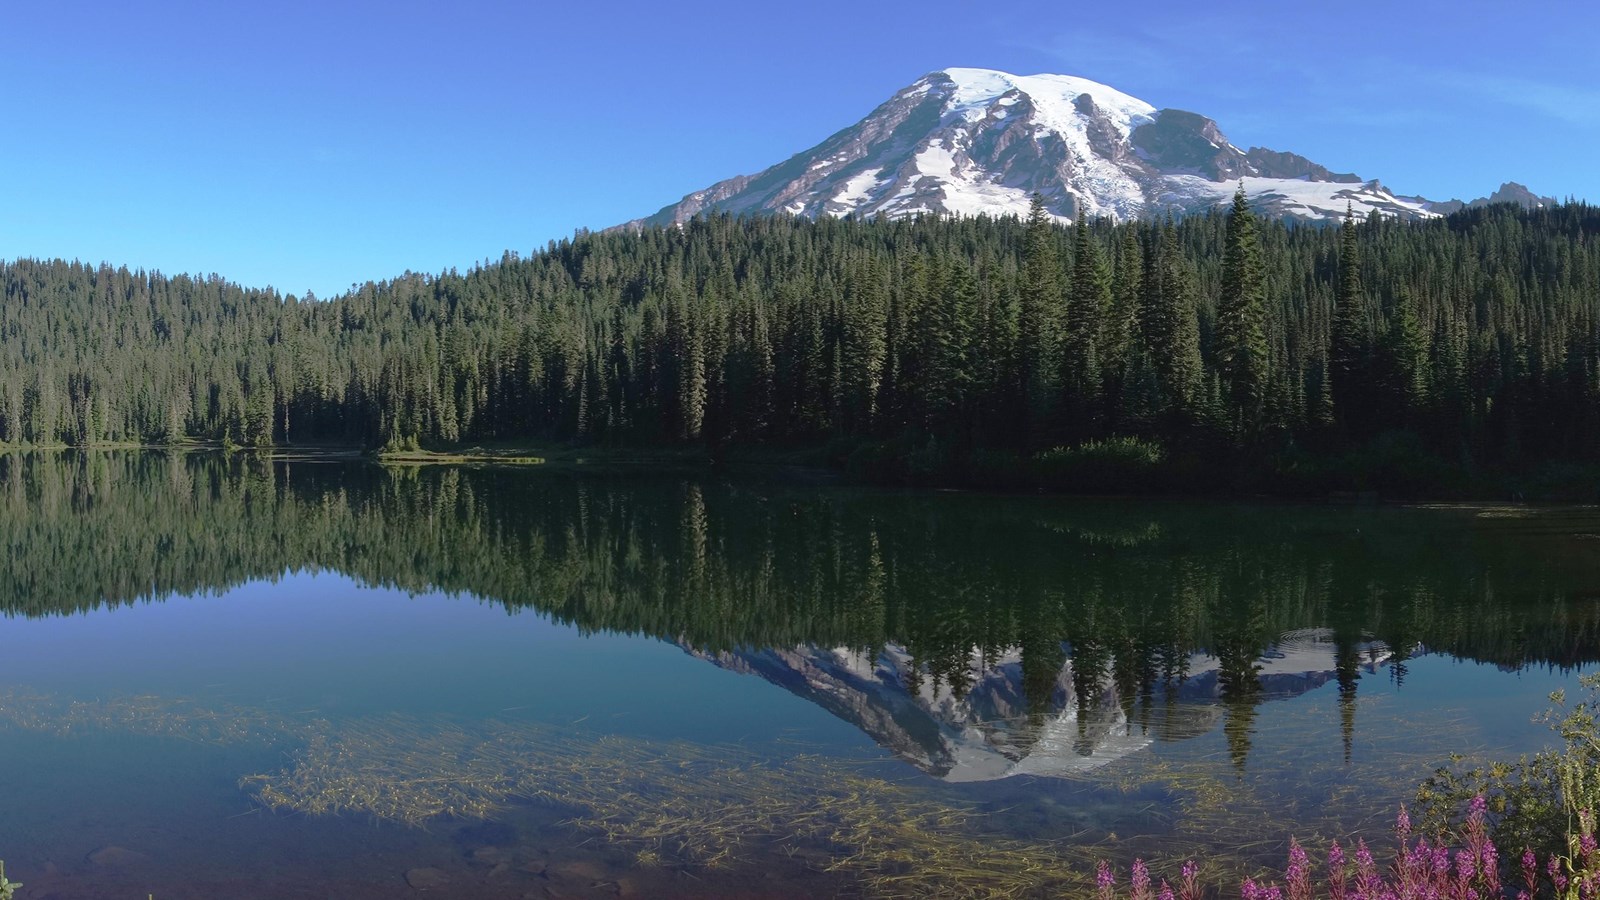 A glaciated mountain and forested slopes reflected in a still mountain lake. 